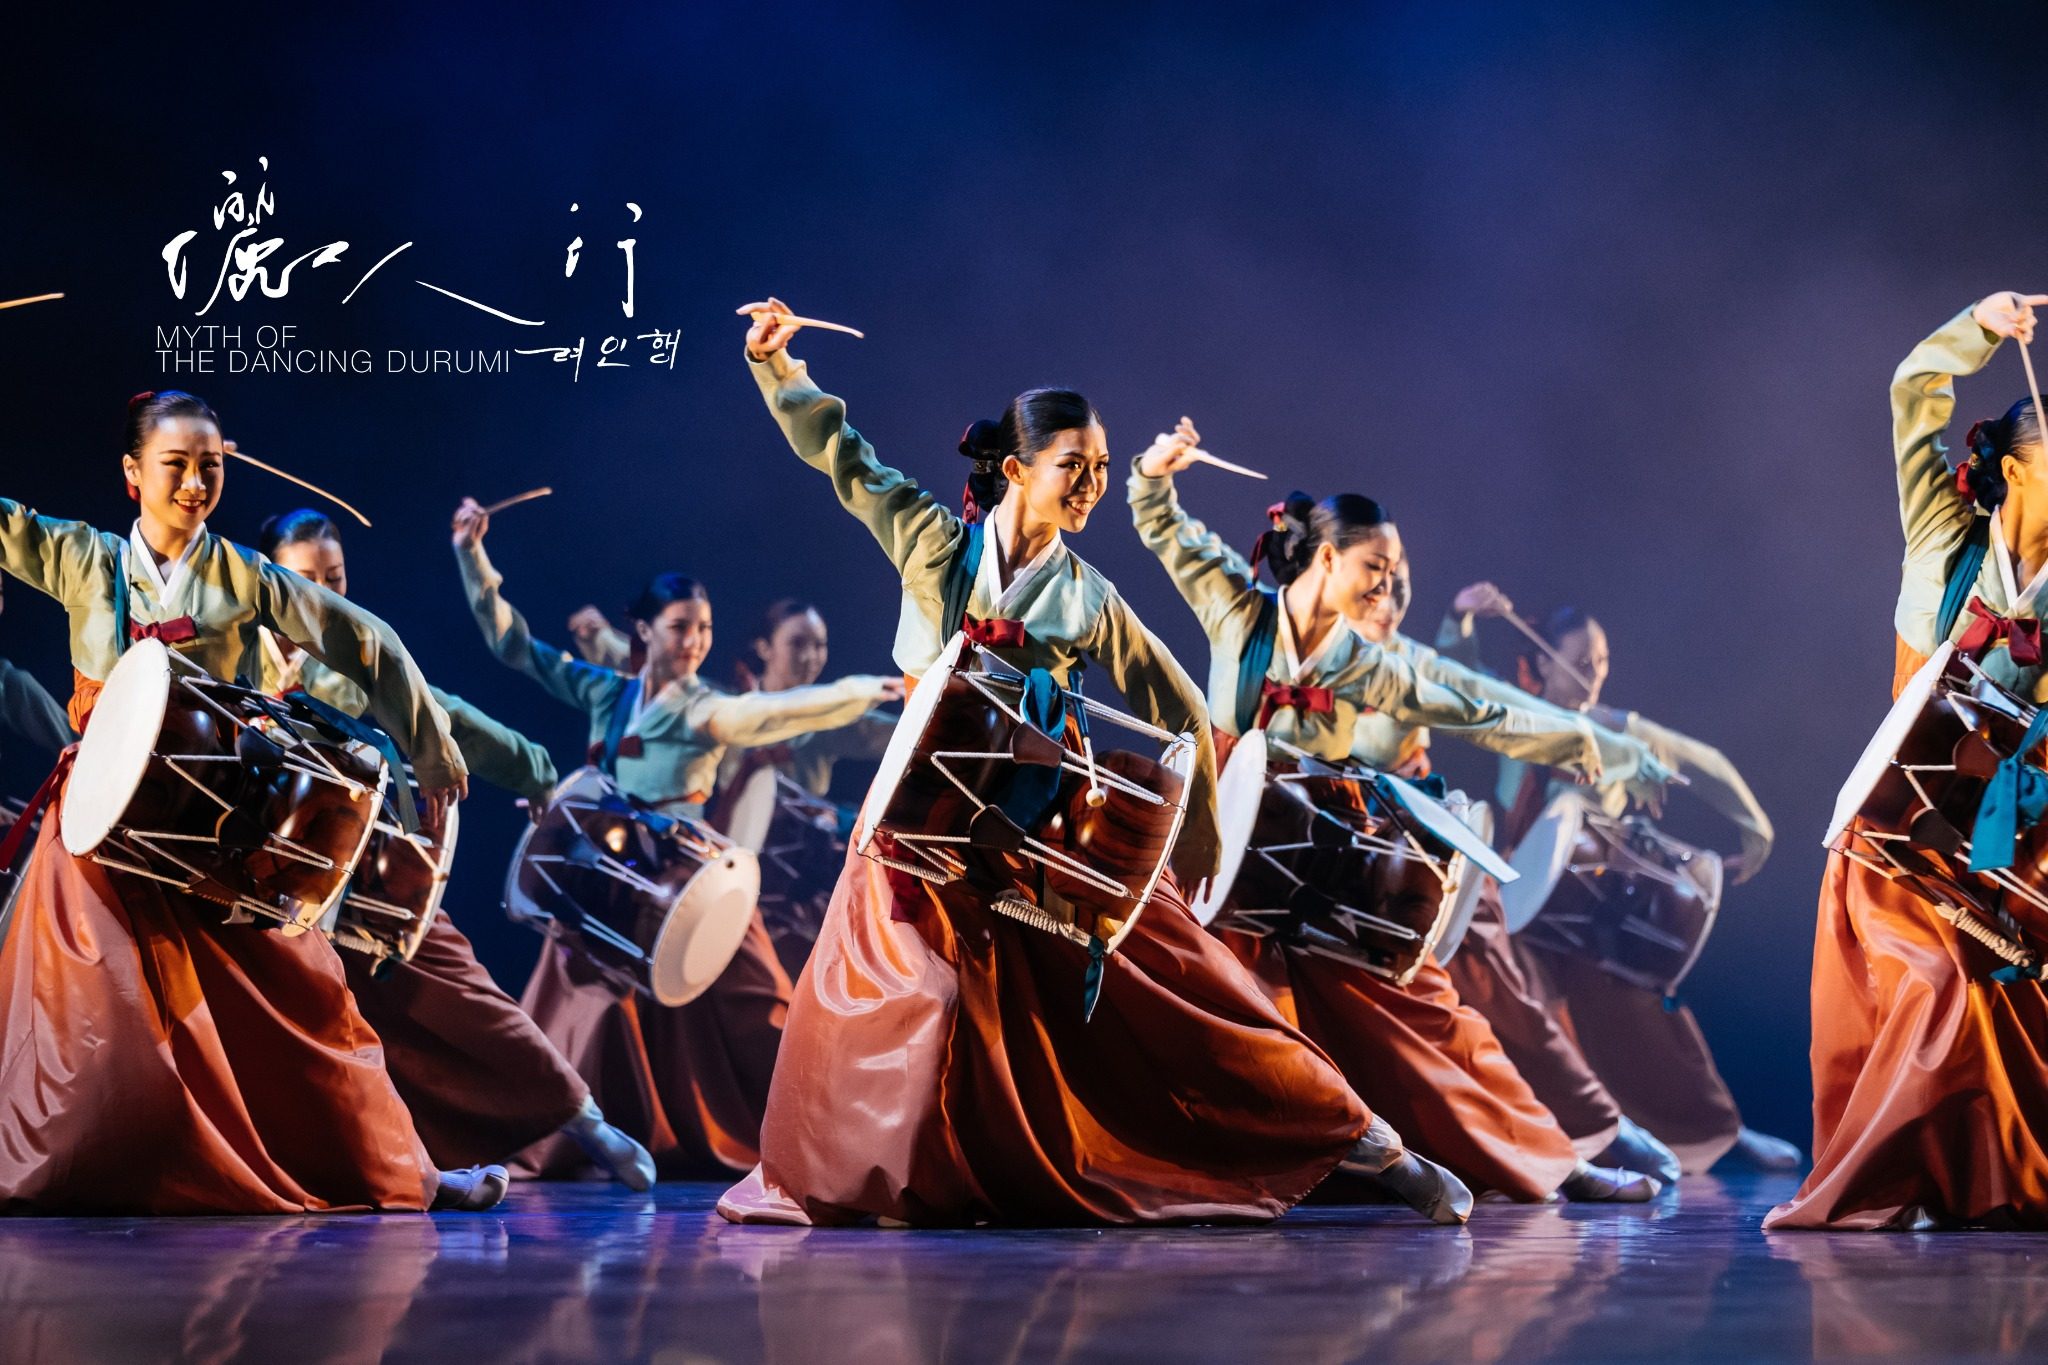 A scene from Myth of the Dancing Durumi, performed by Hong Kong Dance Company. Photo: HKDC